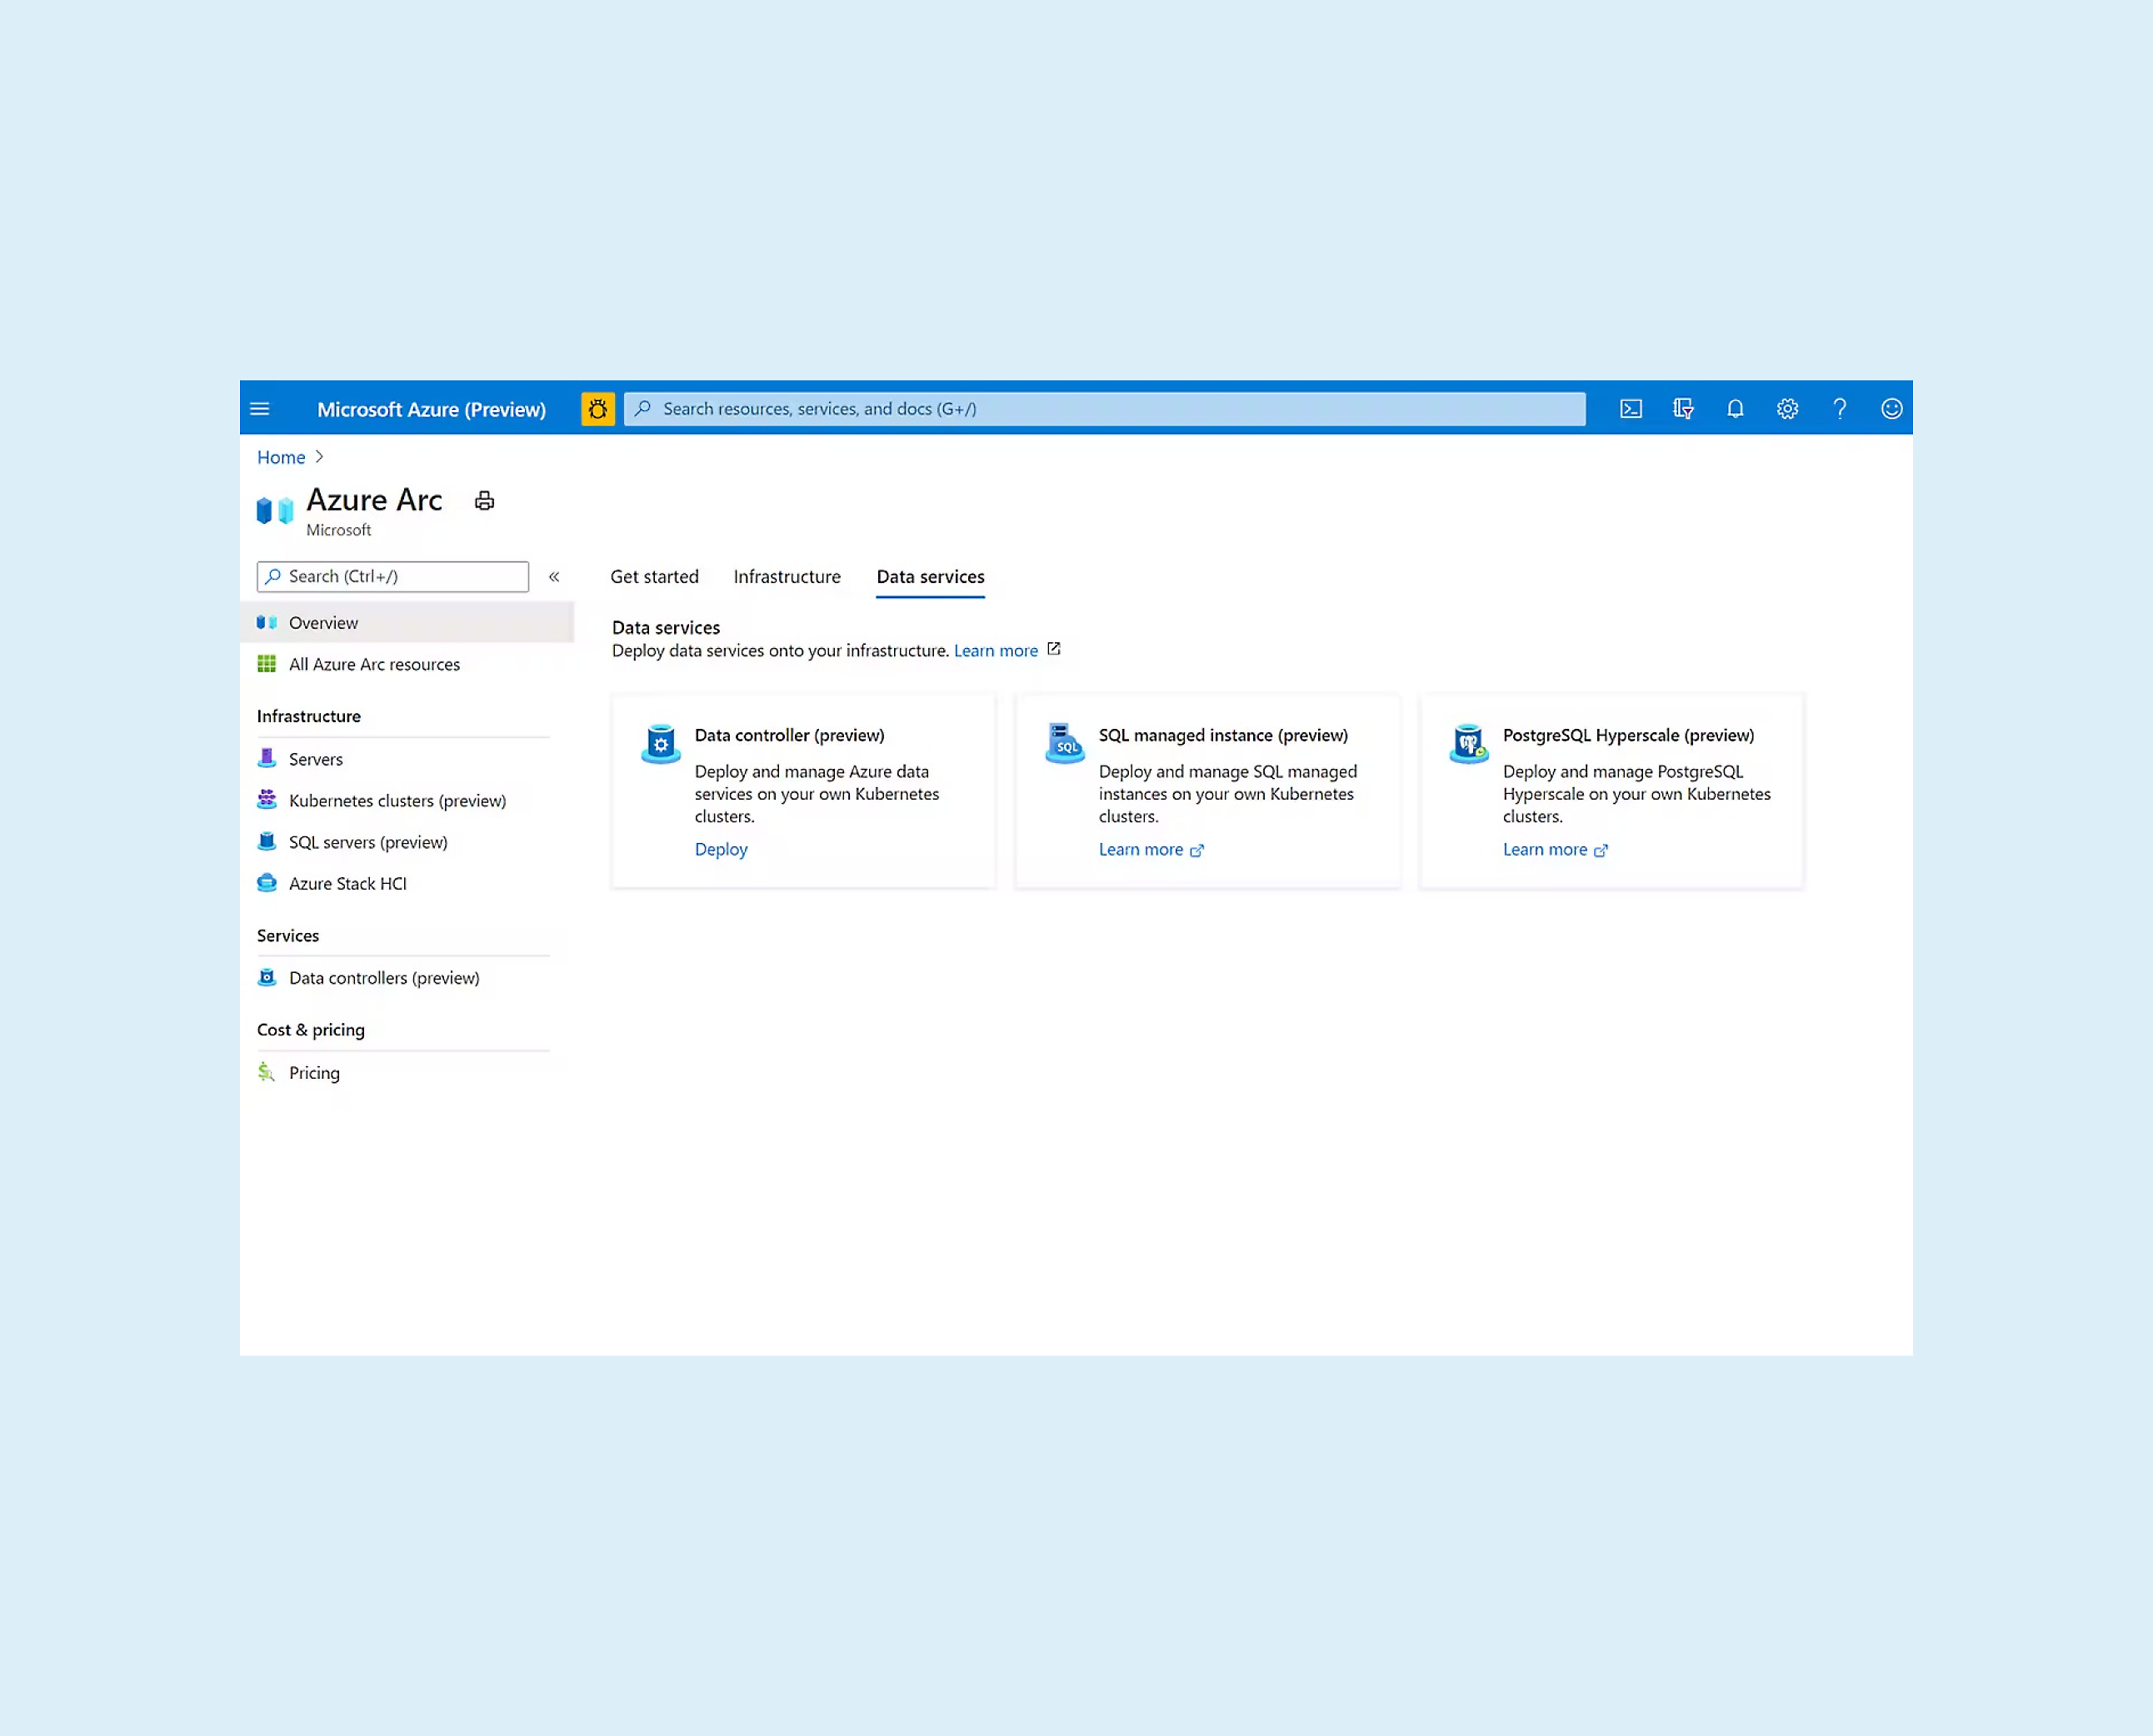 Microsoft Azure portal: AI + ML, analytics, compute, and databases service categories displayed.